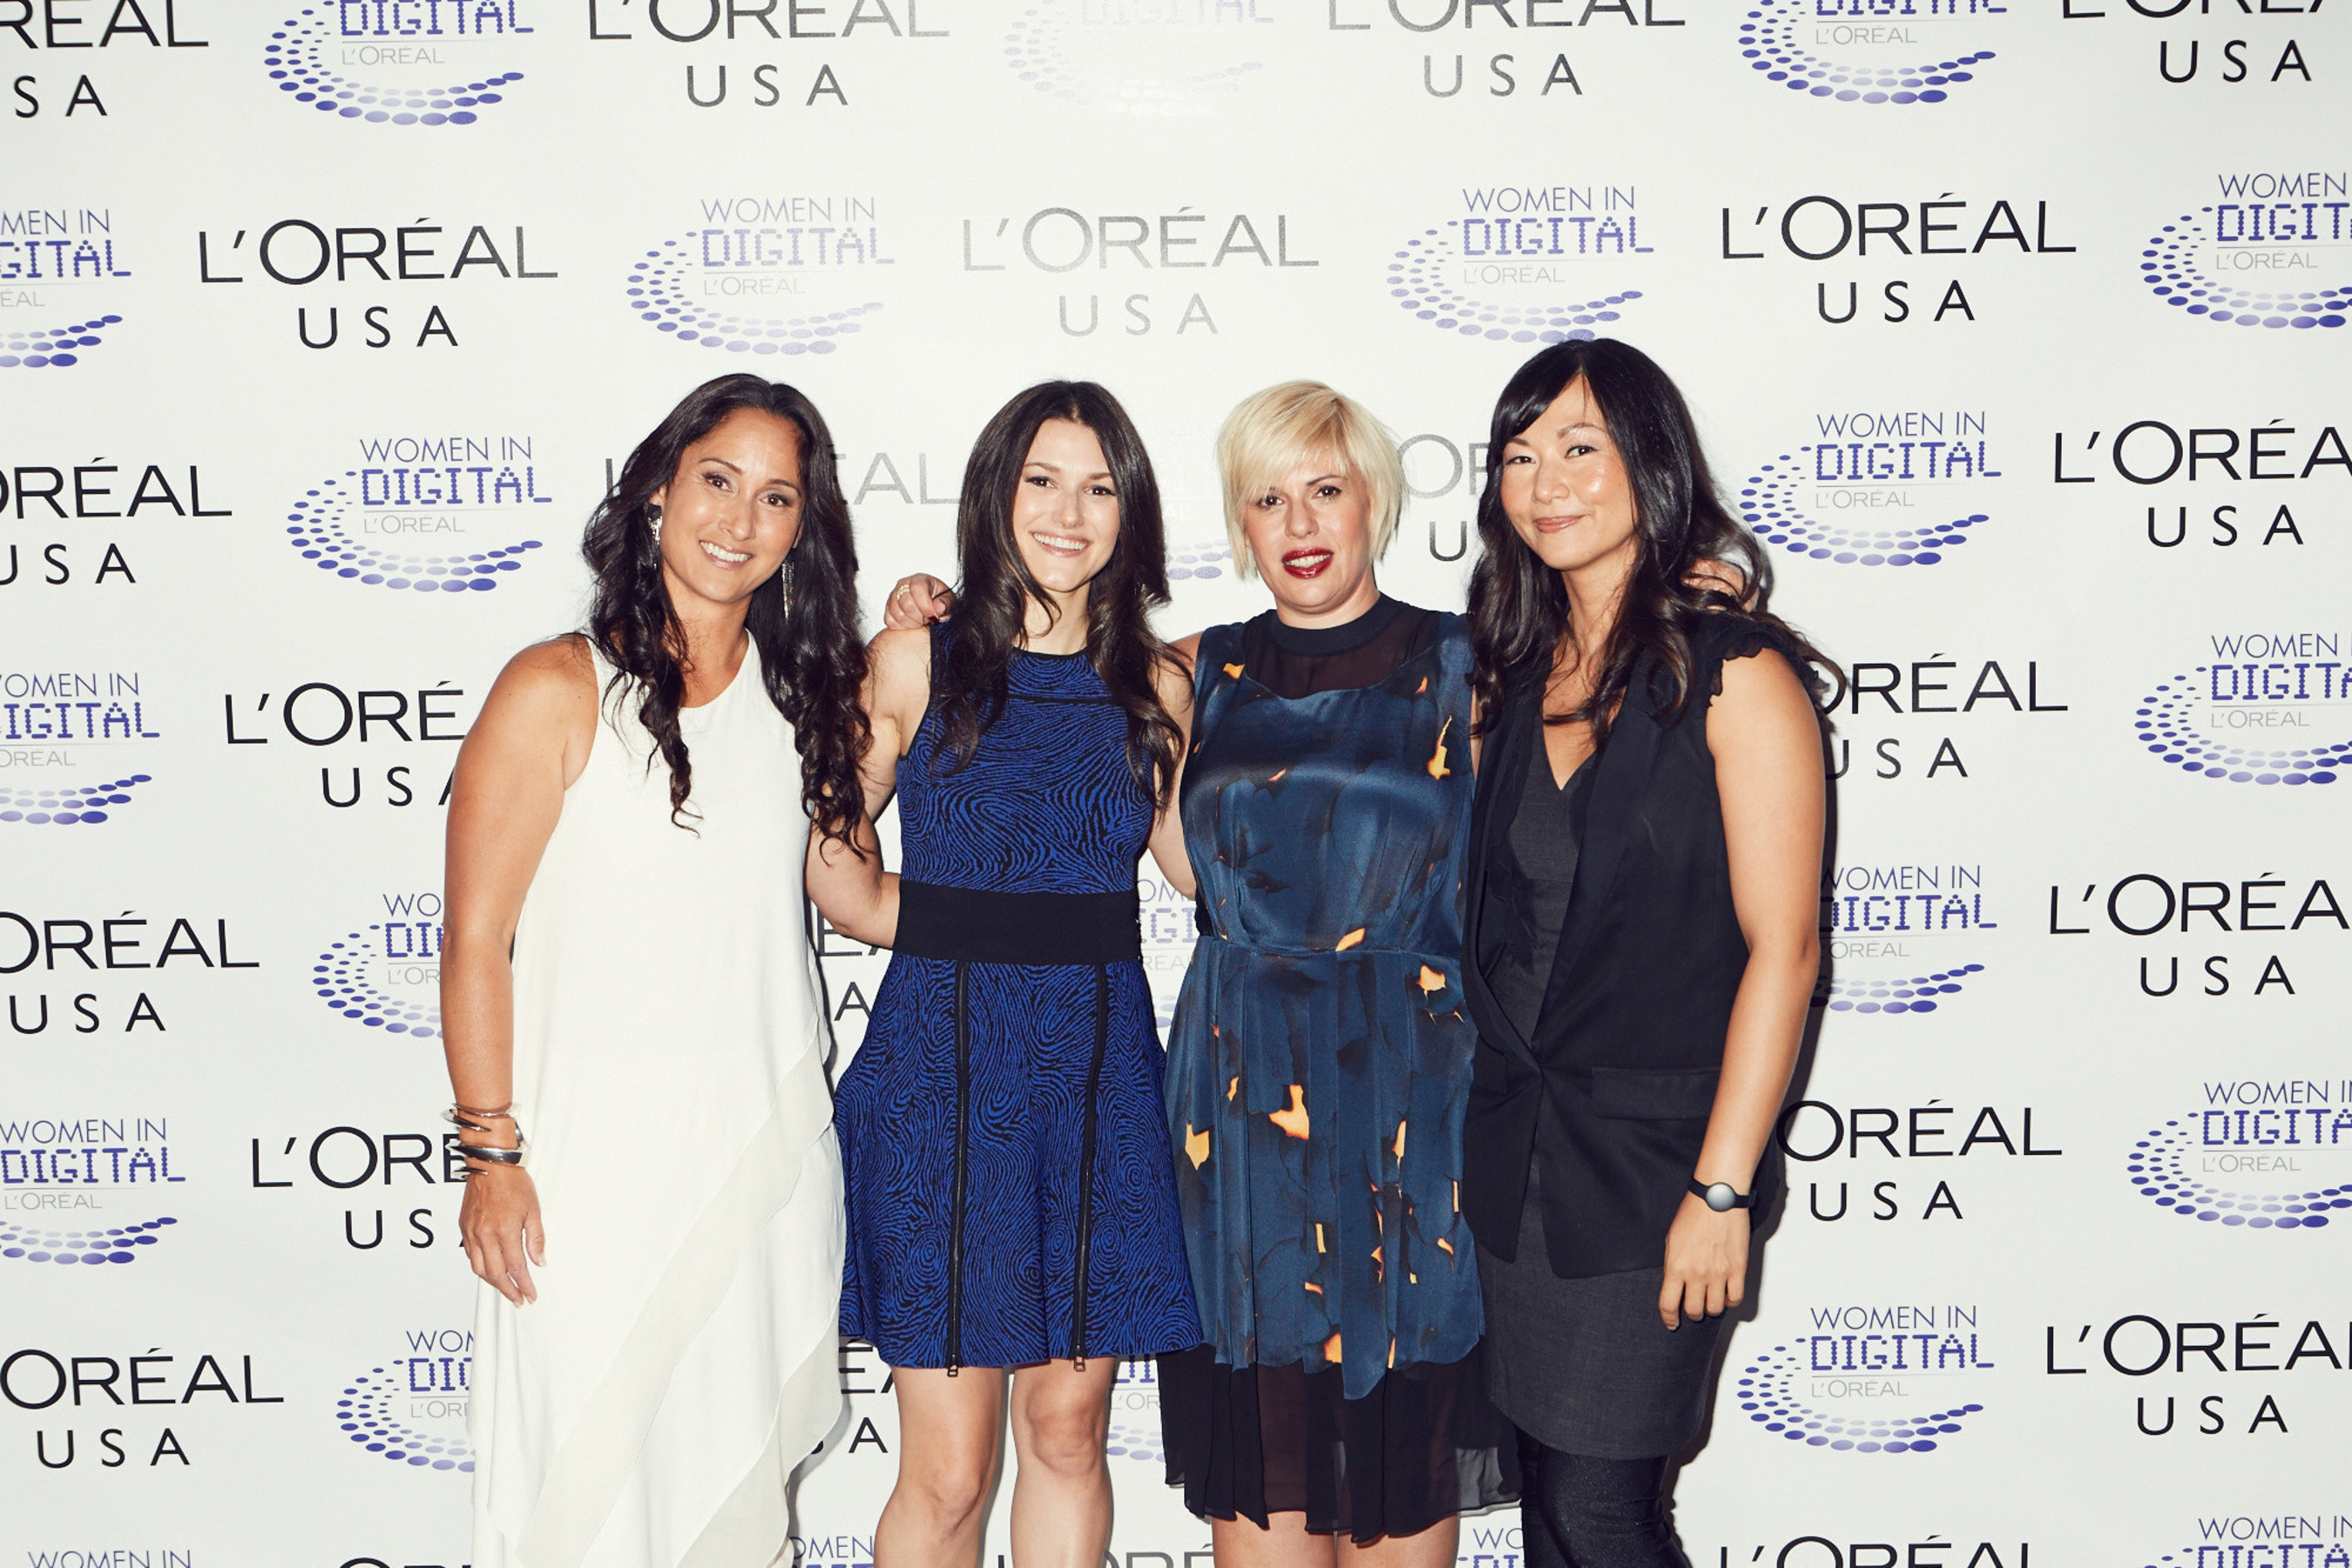 2014 winners of L'Oreal USA's NEXT Generation Awards, and Rachel Weiss, VP of Digital Innovation and Entrepreneurship at L'Oreal USA